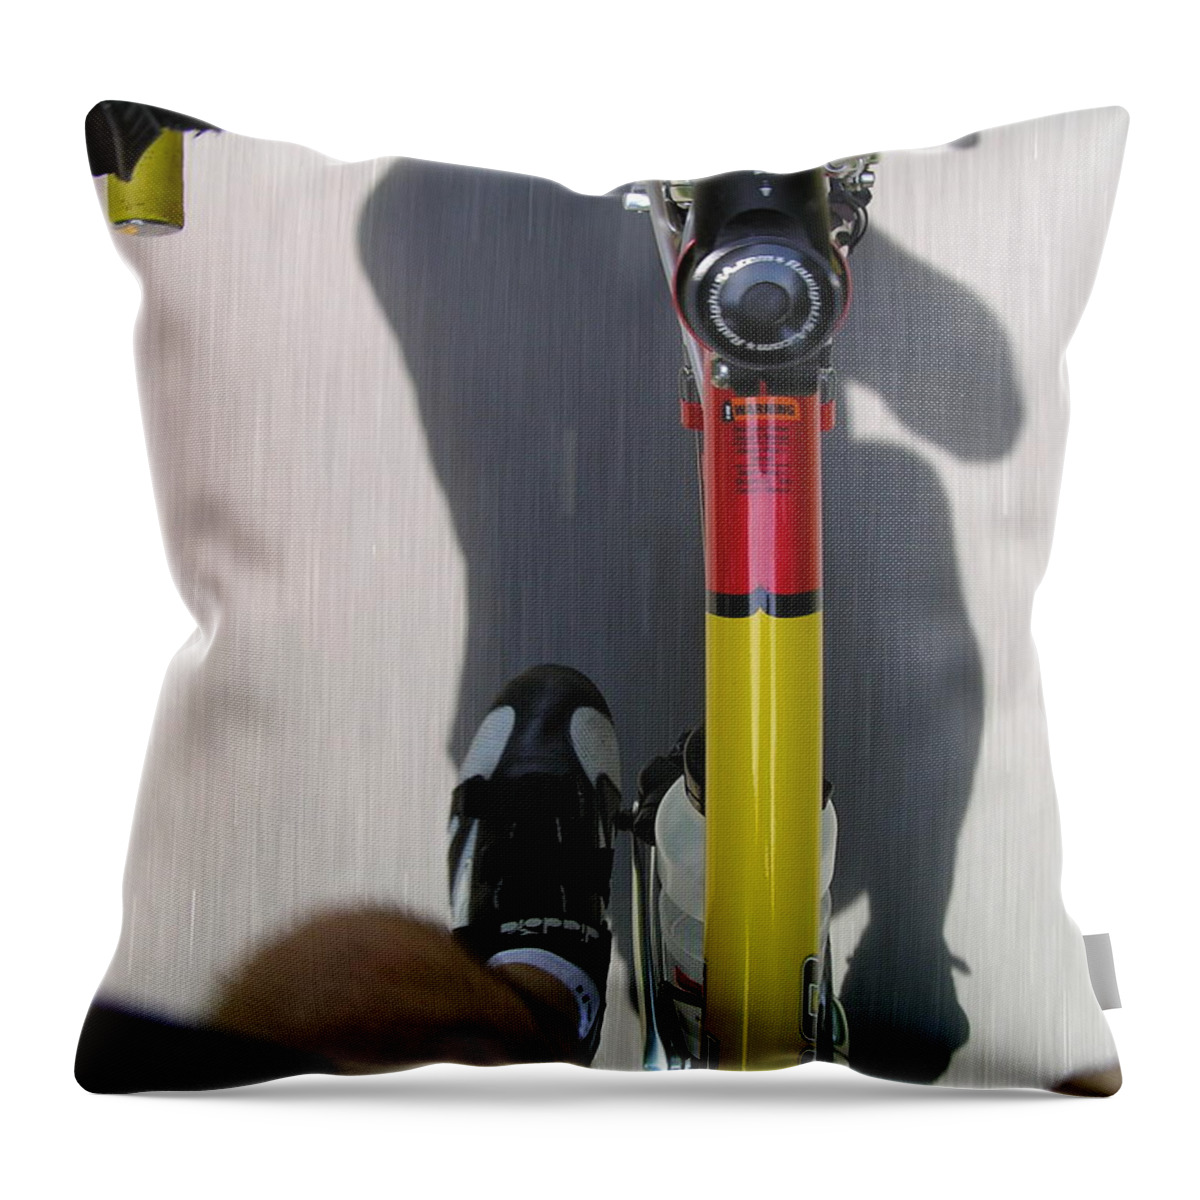 Bike Perspective Throw Pillow featuring the photograph Bike Perspective by Pat Moore